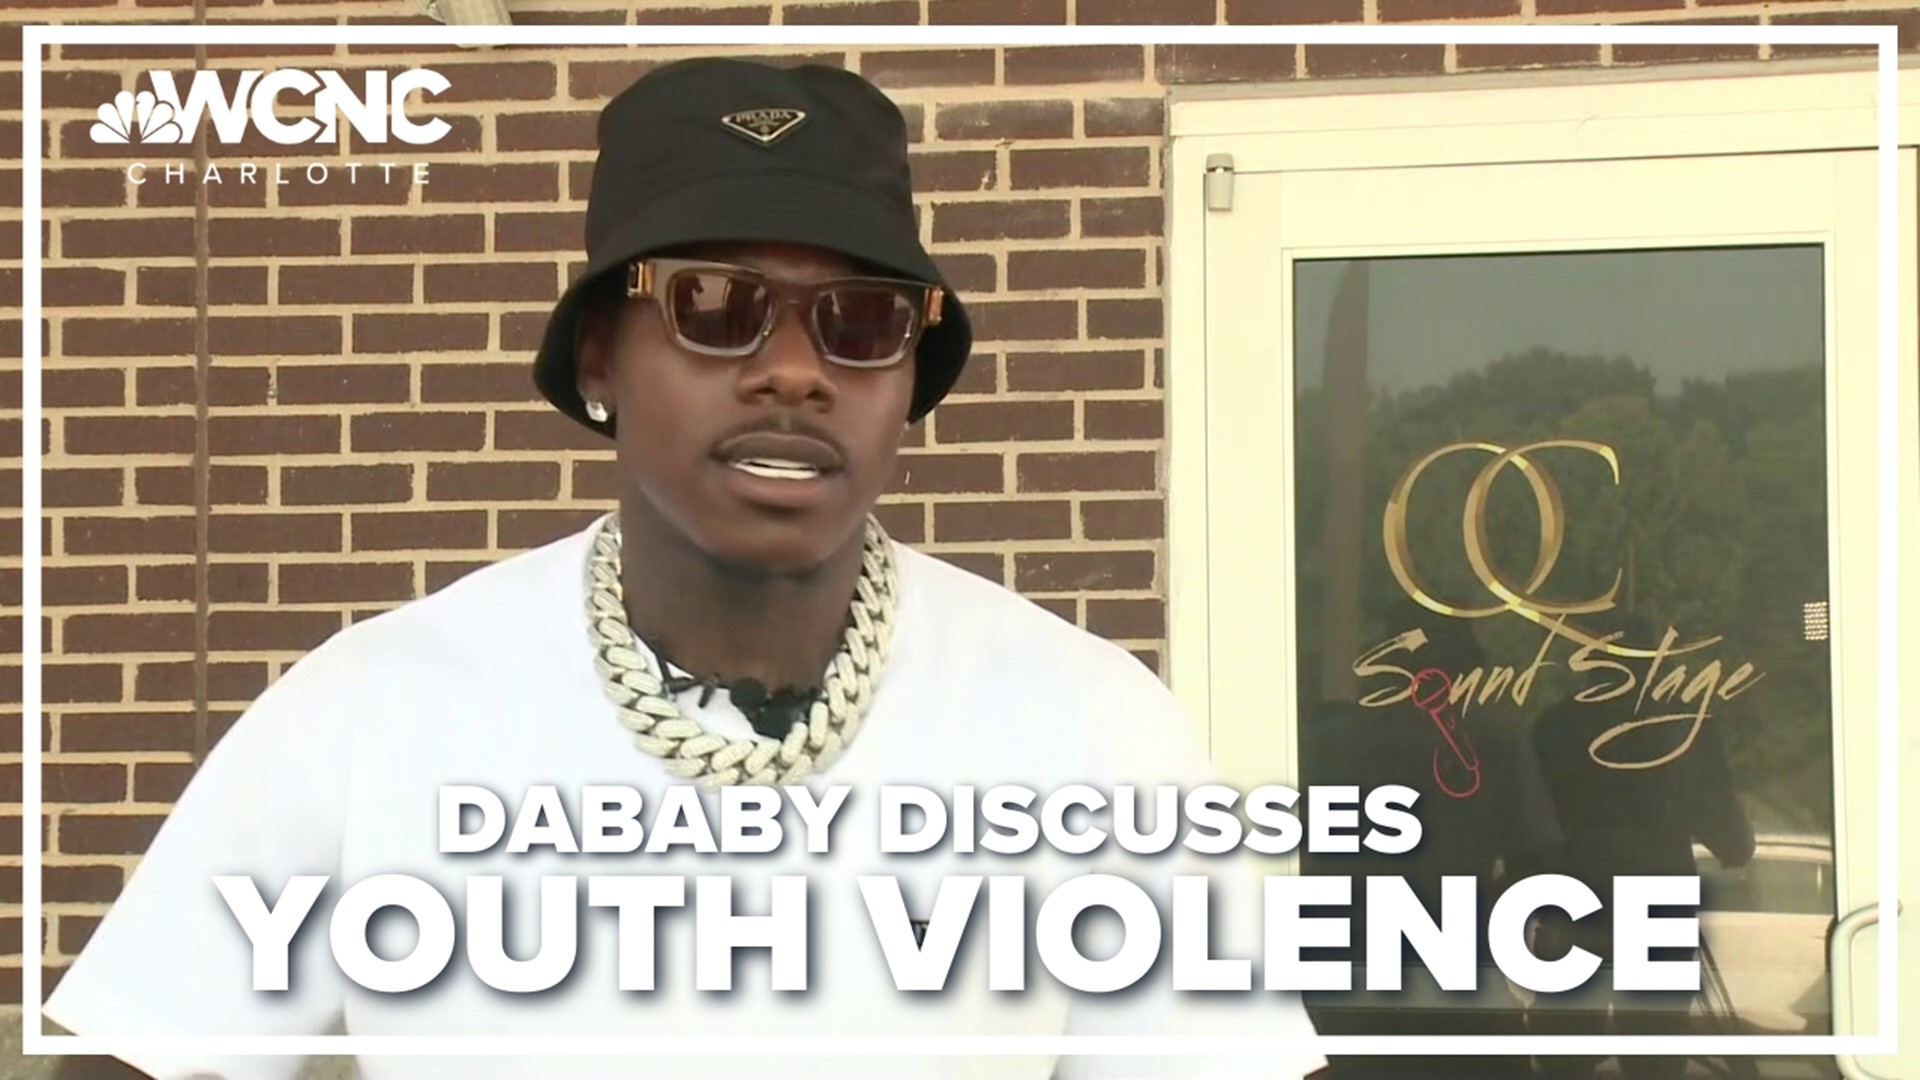 Charlotte native and rapper DaBaby spoke to news outlets on Wednesday.